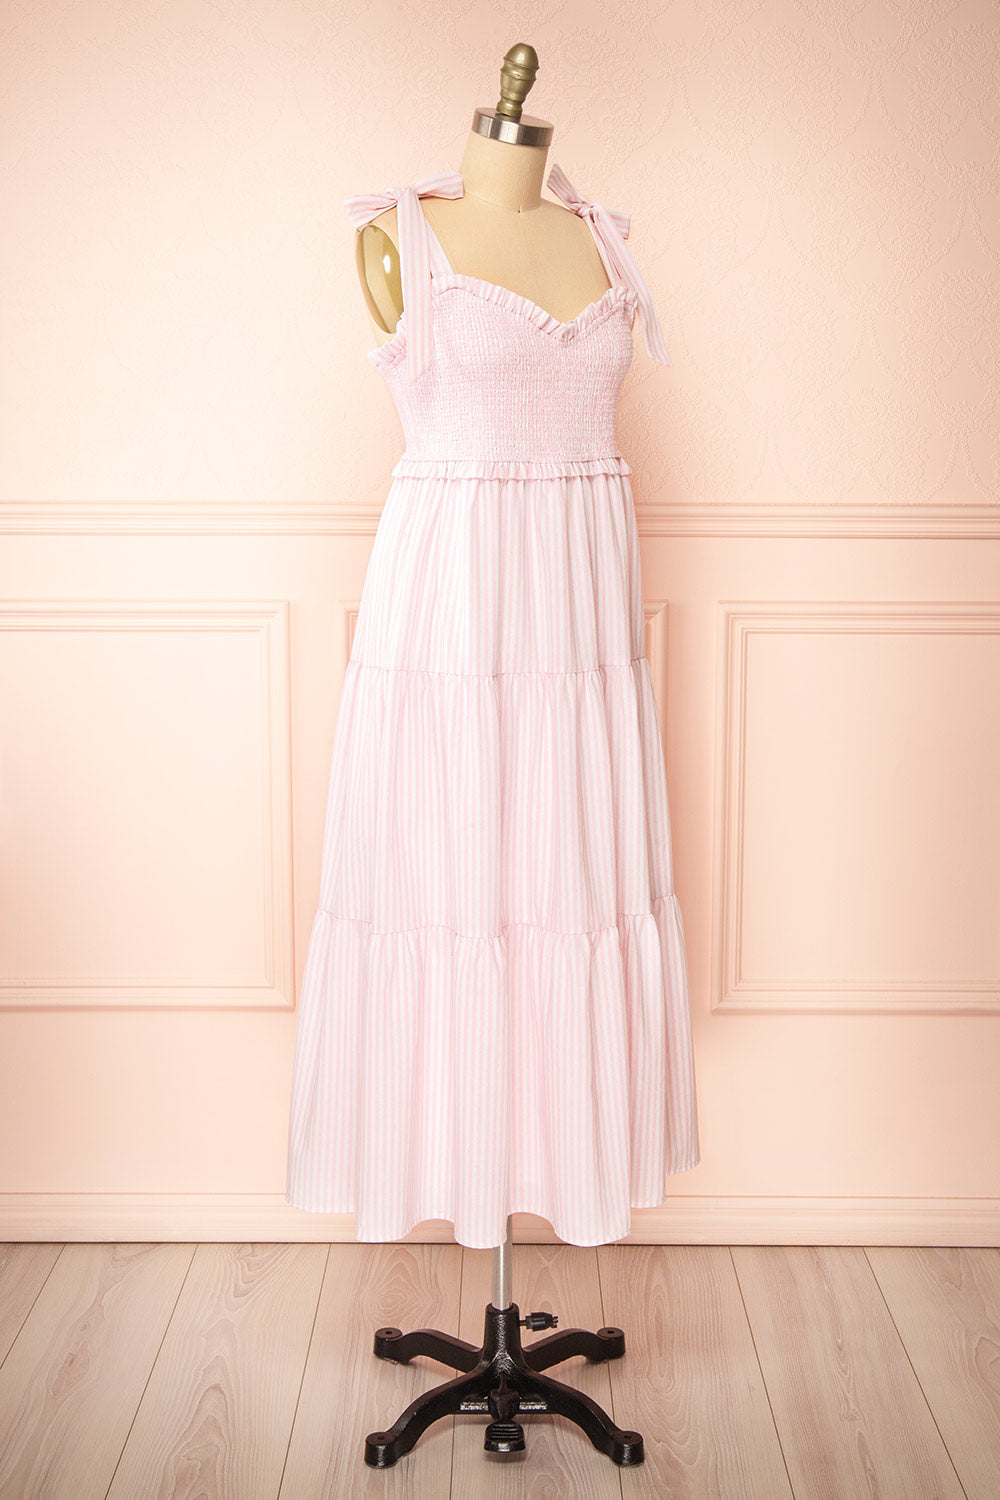 Addison Long Pink Striped Dress | Boutique 1861 side view